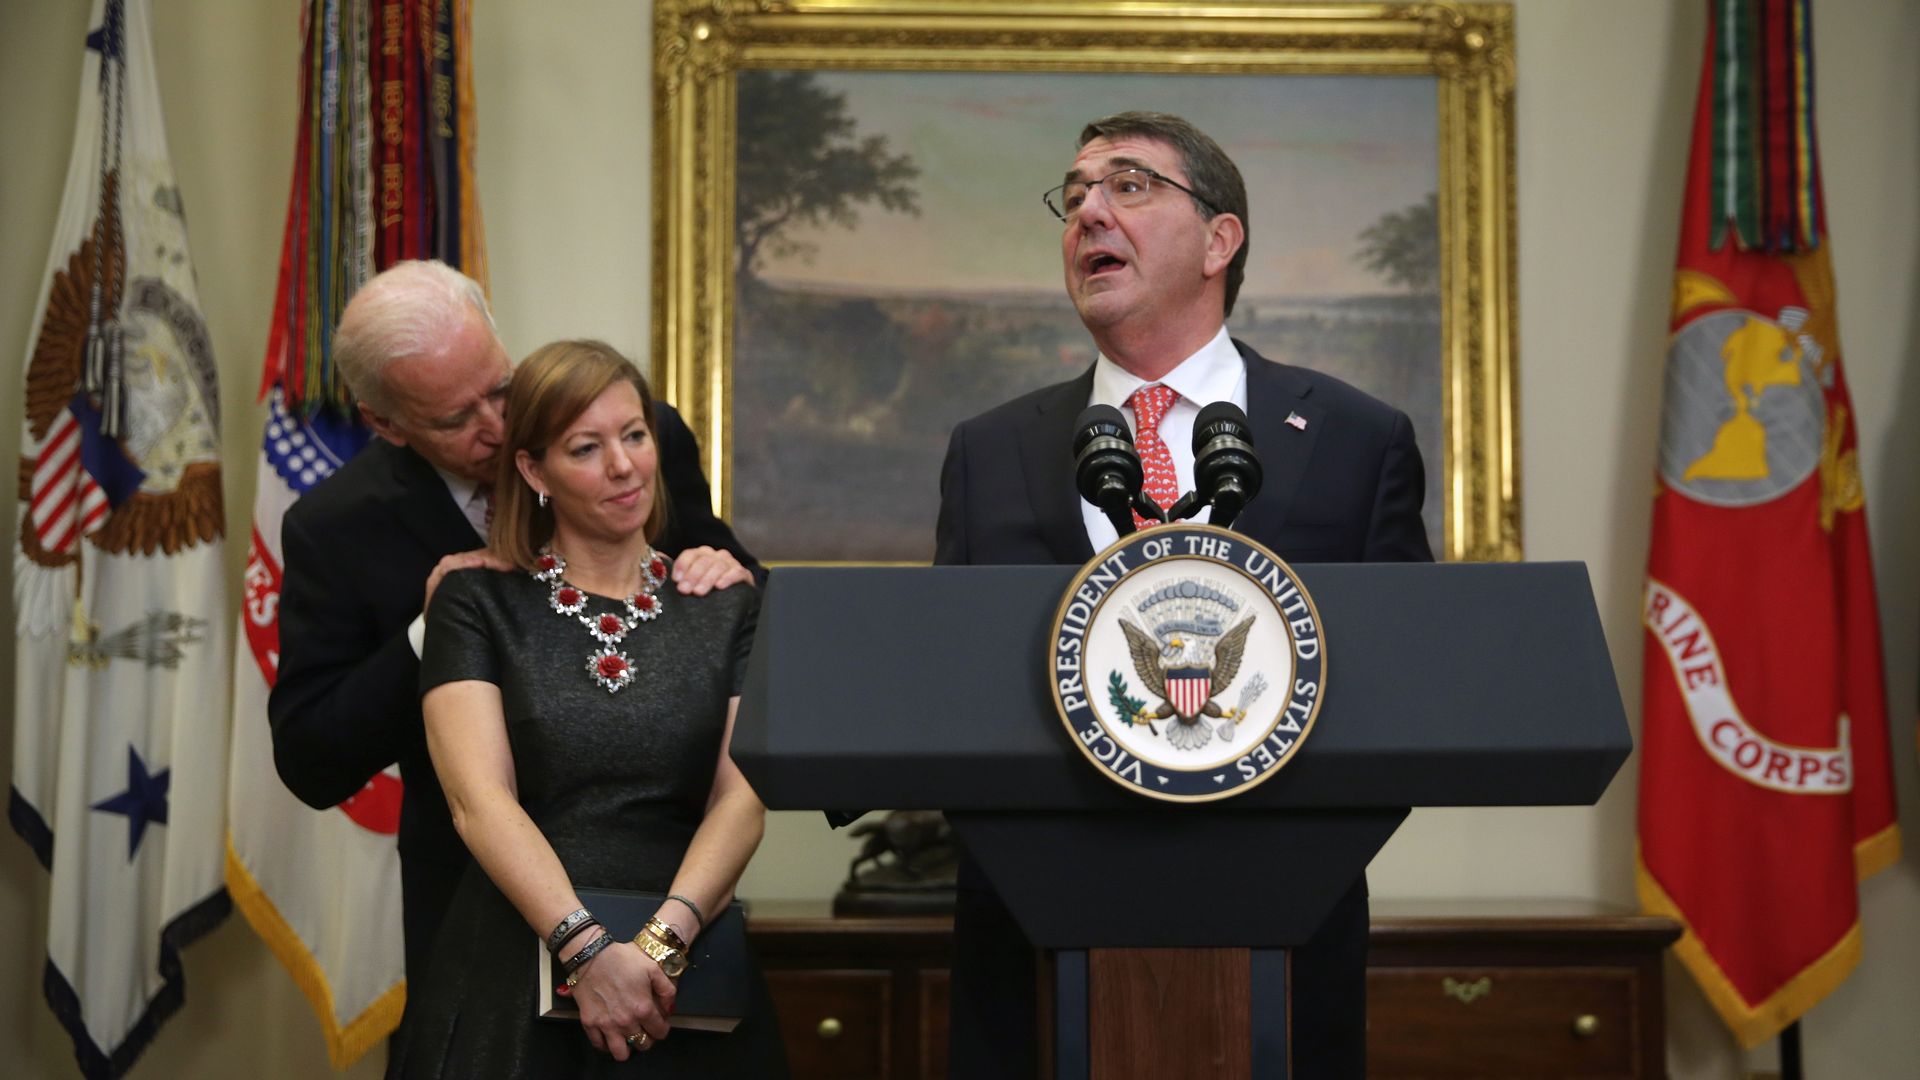 Joe Biden with hands on Stephanie Carter's shoulders, while Ash Carter speaks at podium.